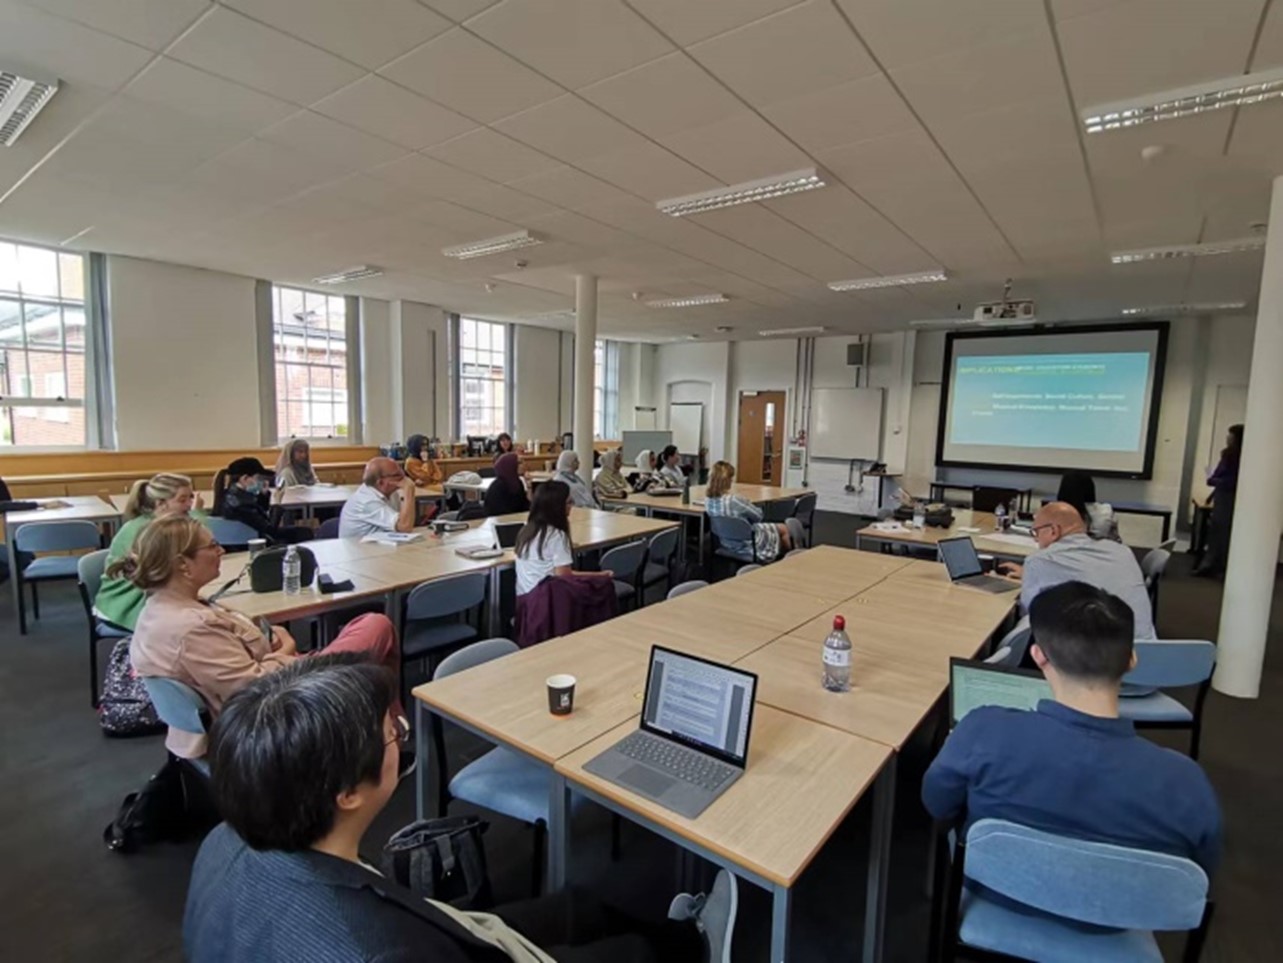 BLOG POST – The 2022 IoE Postgraduate Research Conference was a great success